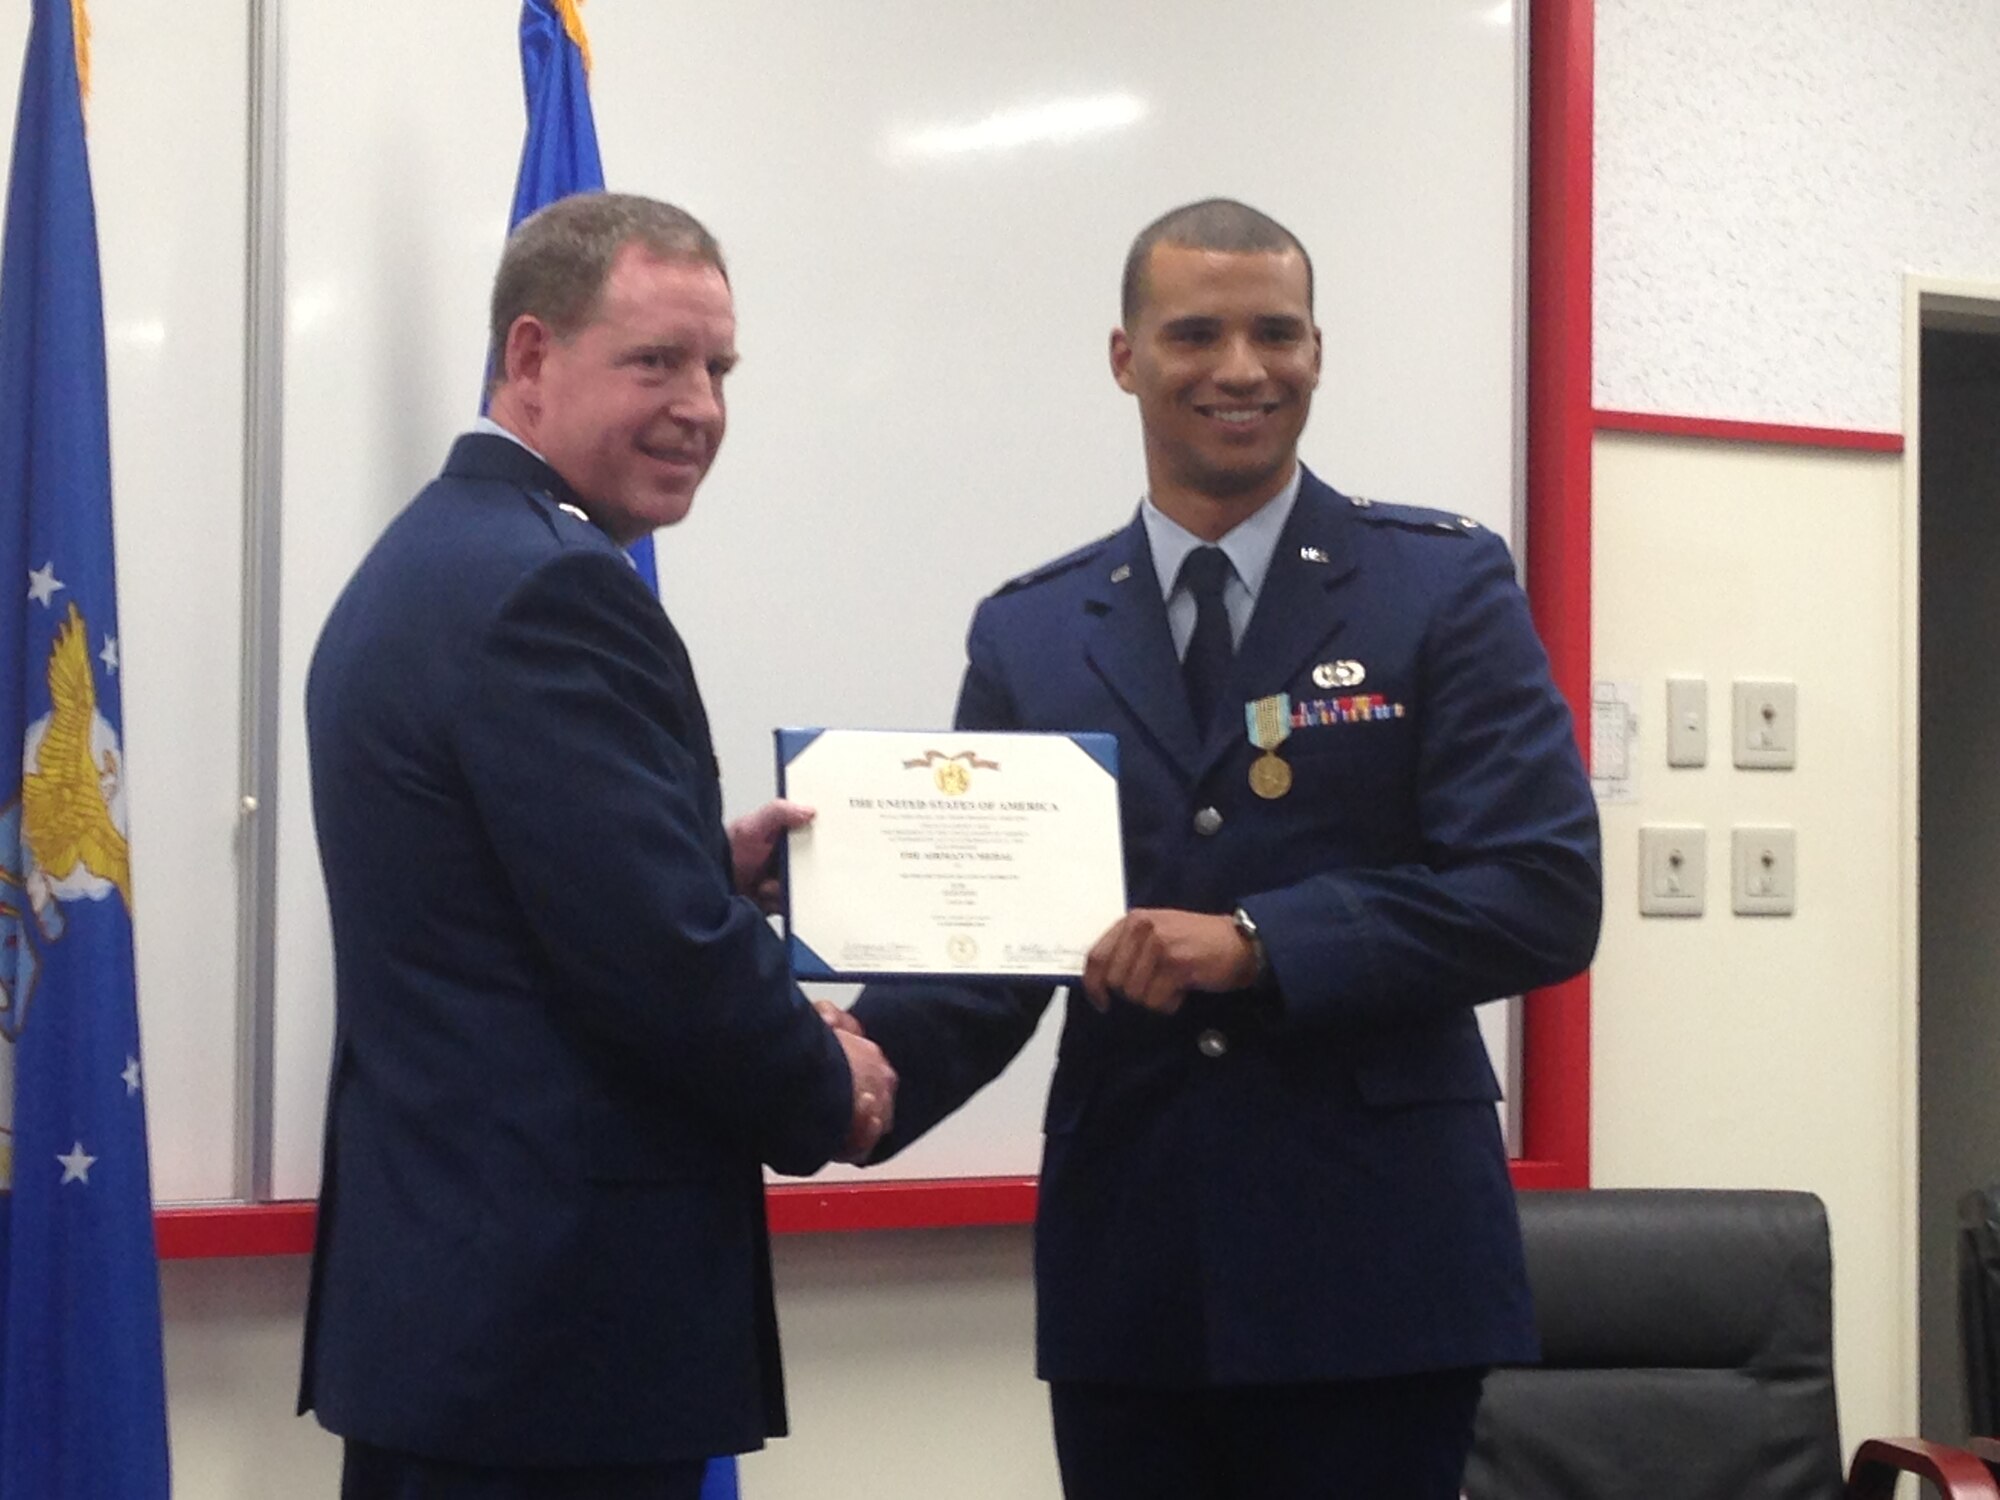 Brig. Gen. James B. Hecker presents 1st Lt. Dayton Gilbreath with a certificate to accompany his Airman’s Medal March 20, 2015, on Kadena Air Base, Japan. Gilbreath was awarded the medal for rescuing an Airman who jumped overboard from a sailing ship in the Adriatic Sea, July 3, 2012. Hecker is the commander of the 18th Wing and Gilbreath is a contracting administrator assigned to the 18th Contracting Squadron. (U.S. Air Force photo/Staff Sgt. Amber Jacobs)